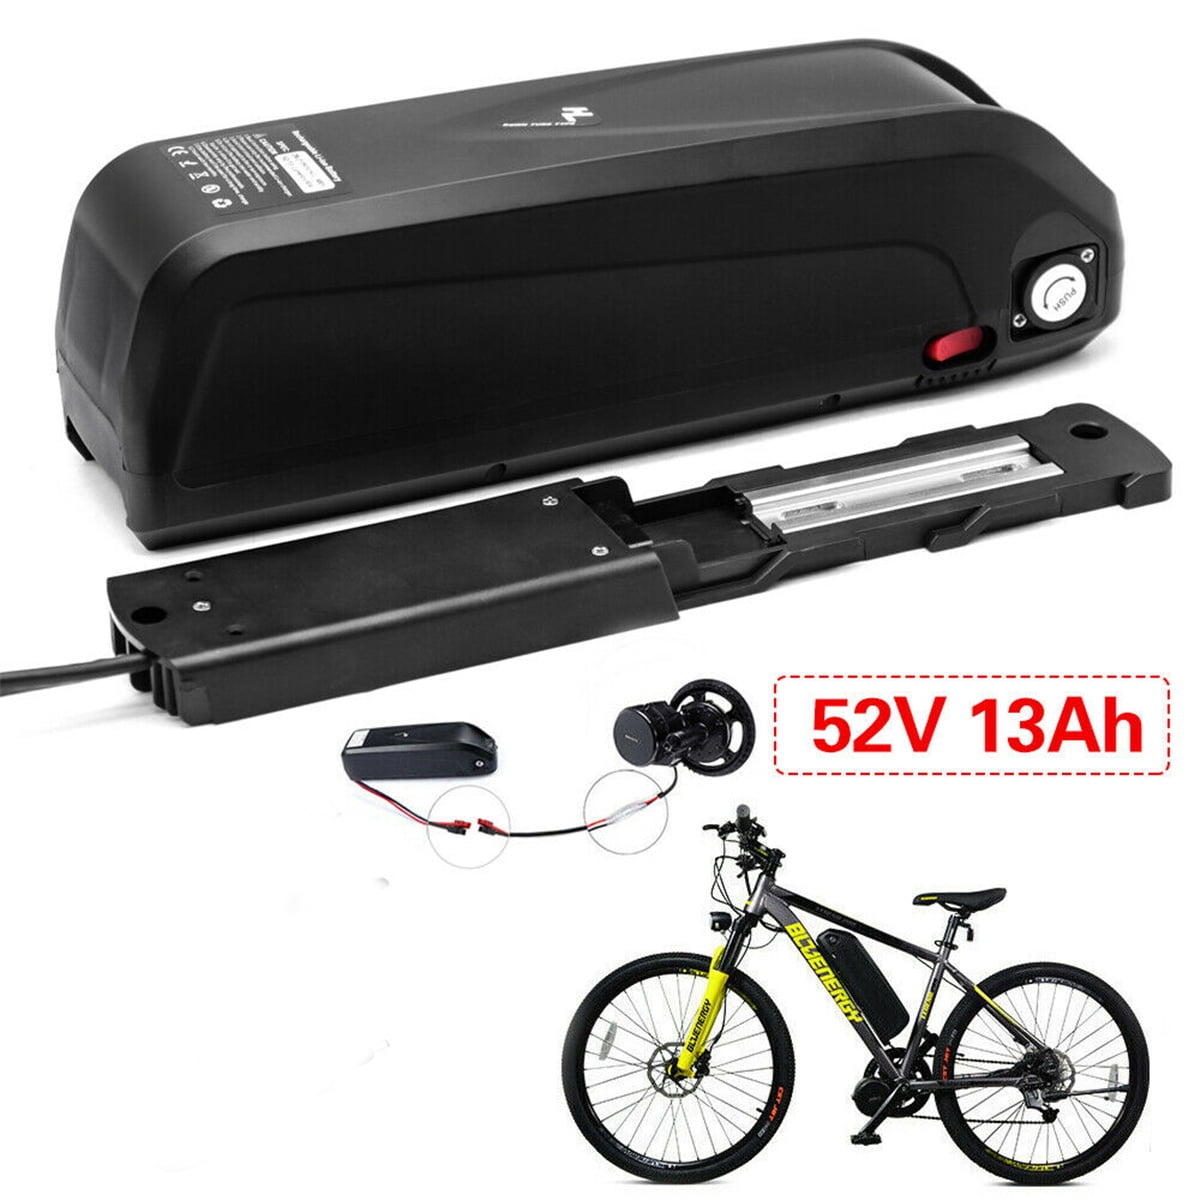 UNIT PACK POWER 36V 48V 52V ebike Battery 10-18AH Electric Bicycle Battery for 1500W/1200W/1000W/800W/500W bafang Motor with Charger 